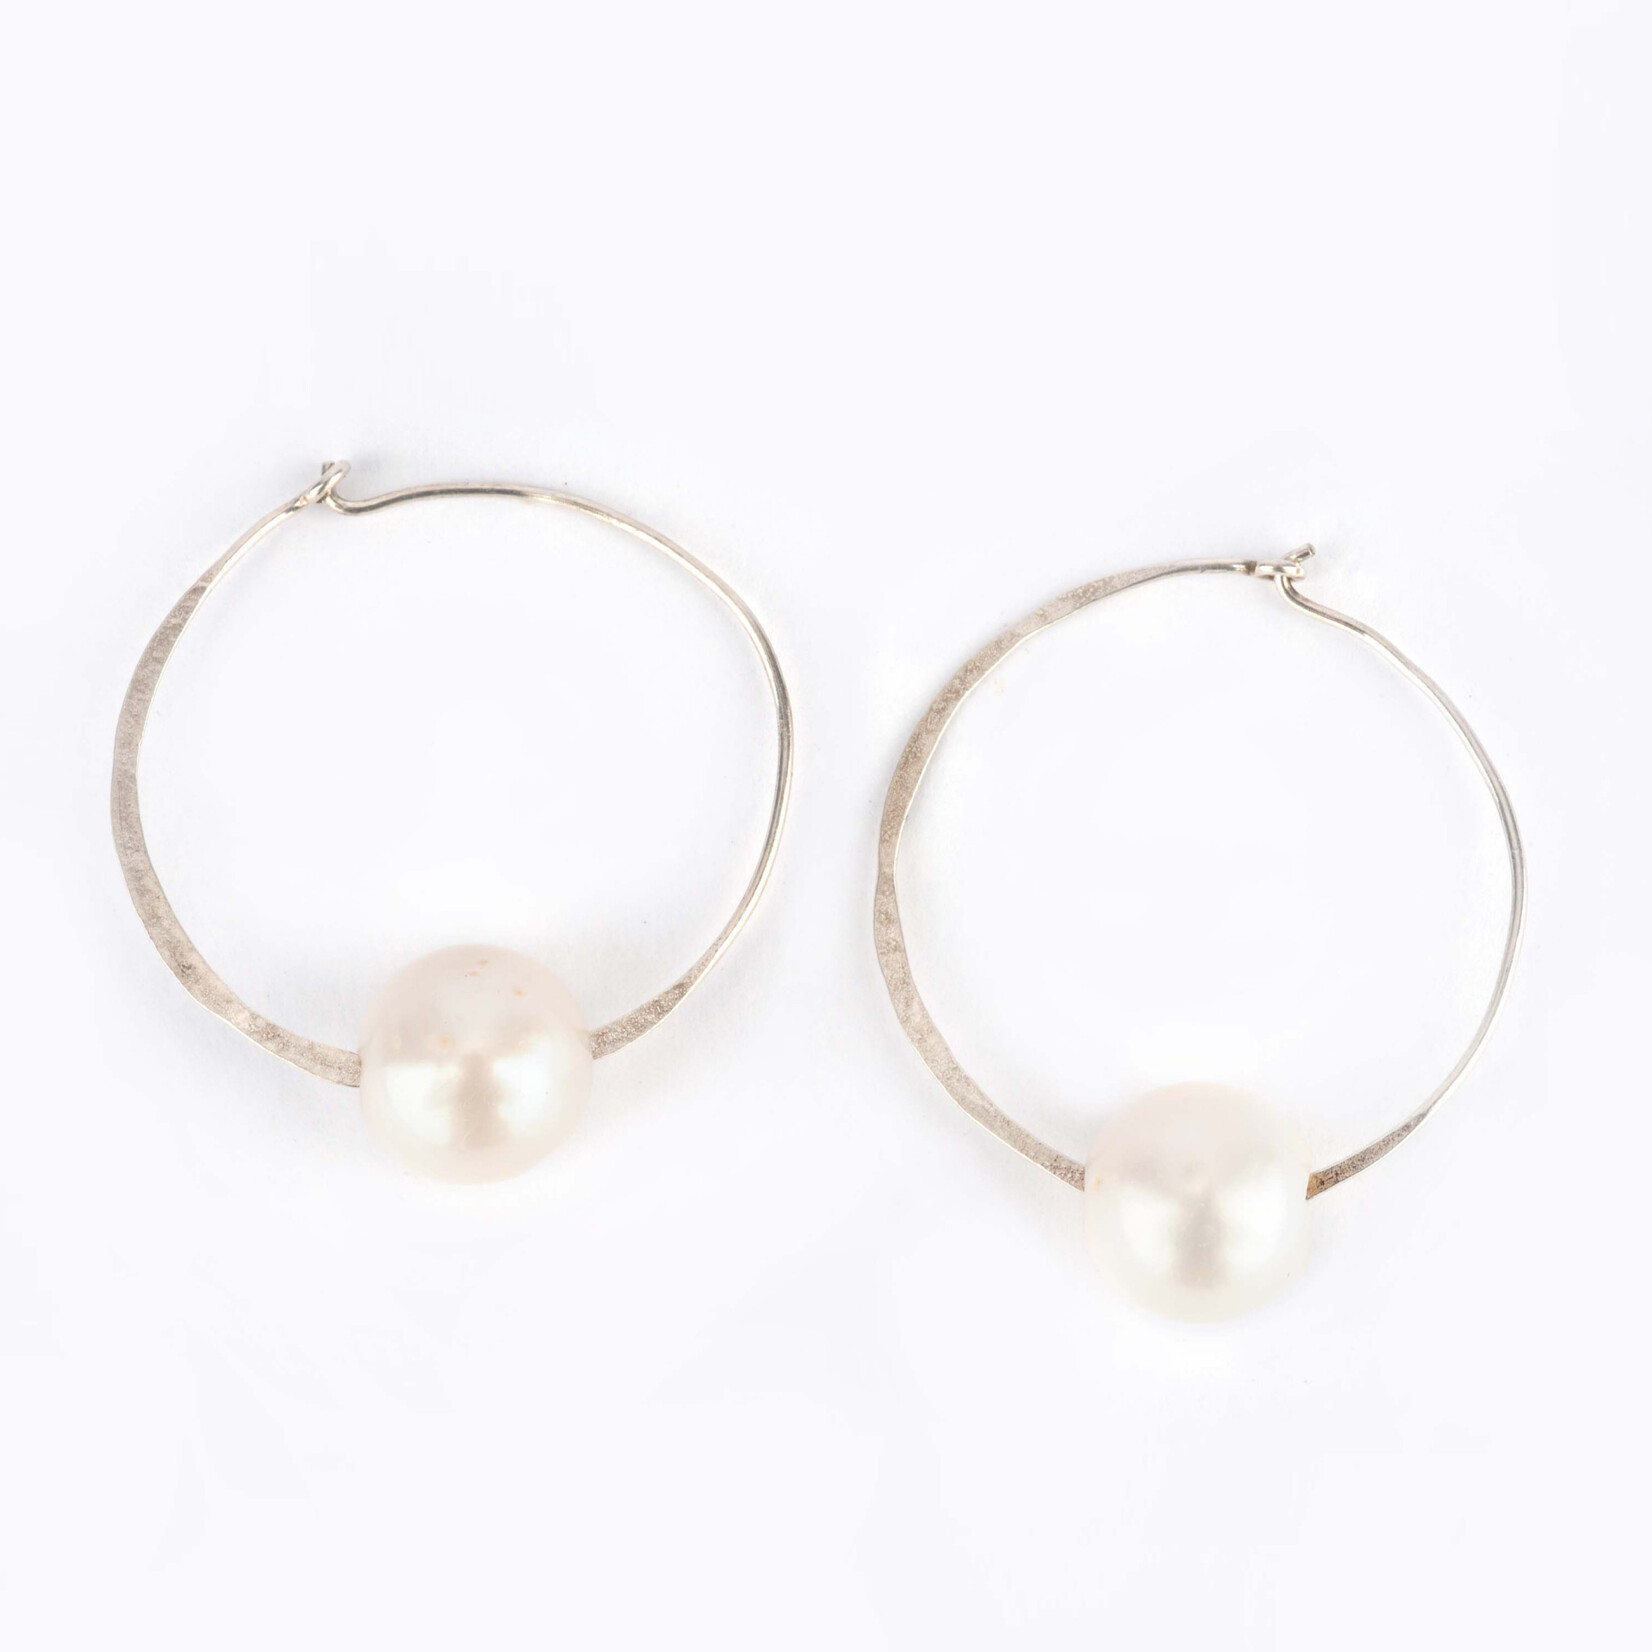 Mina Danielle Hammered Silver Hoops with Large Drilled White Fresh Water Pearl